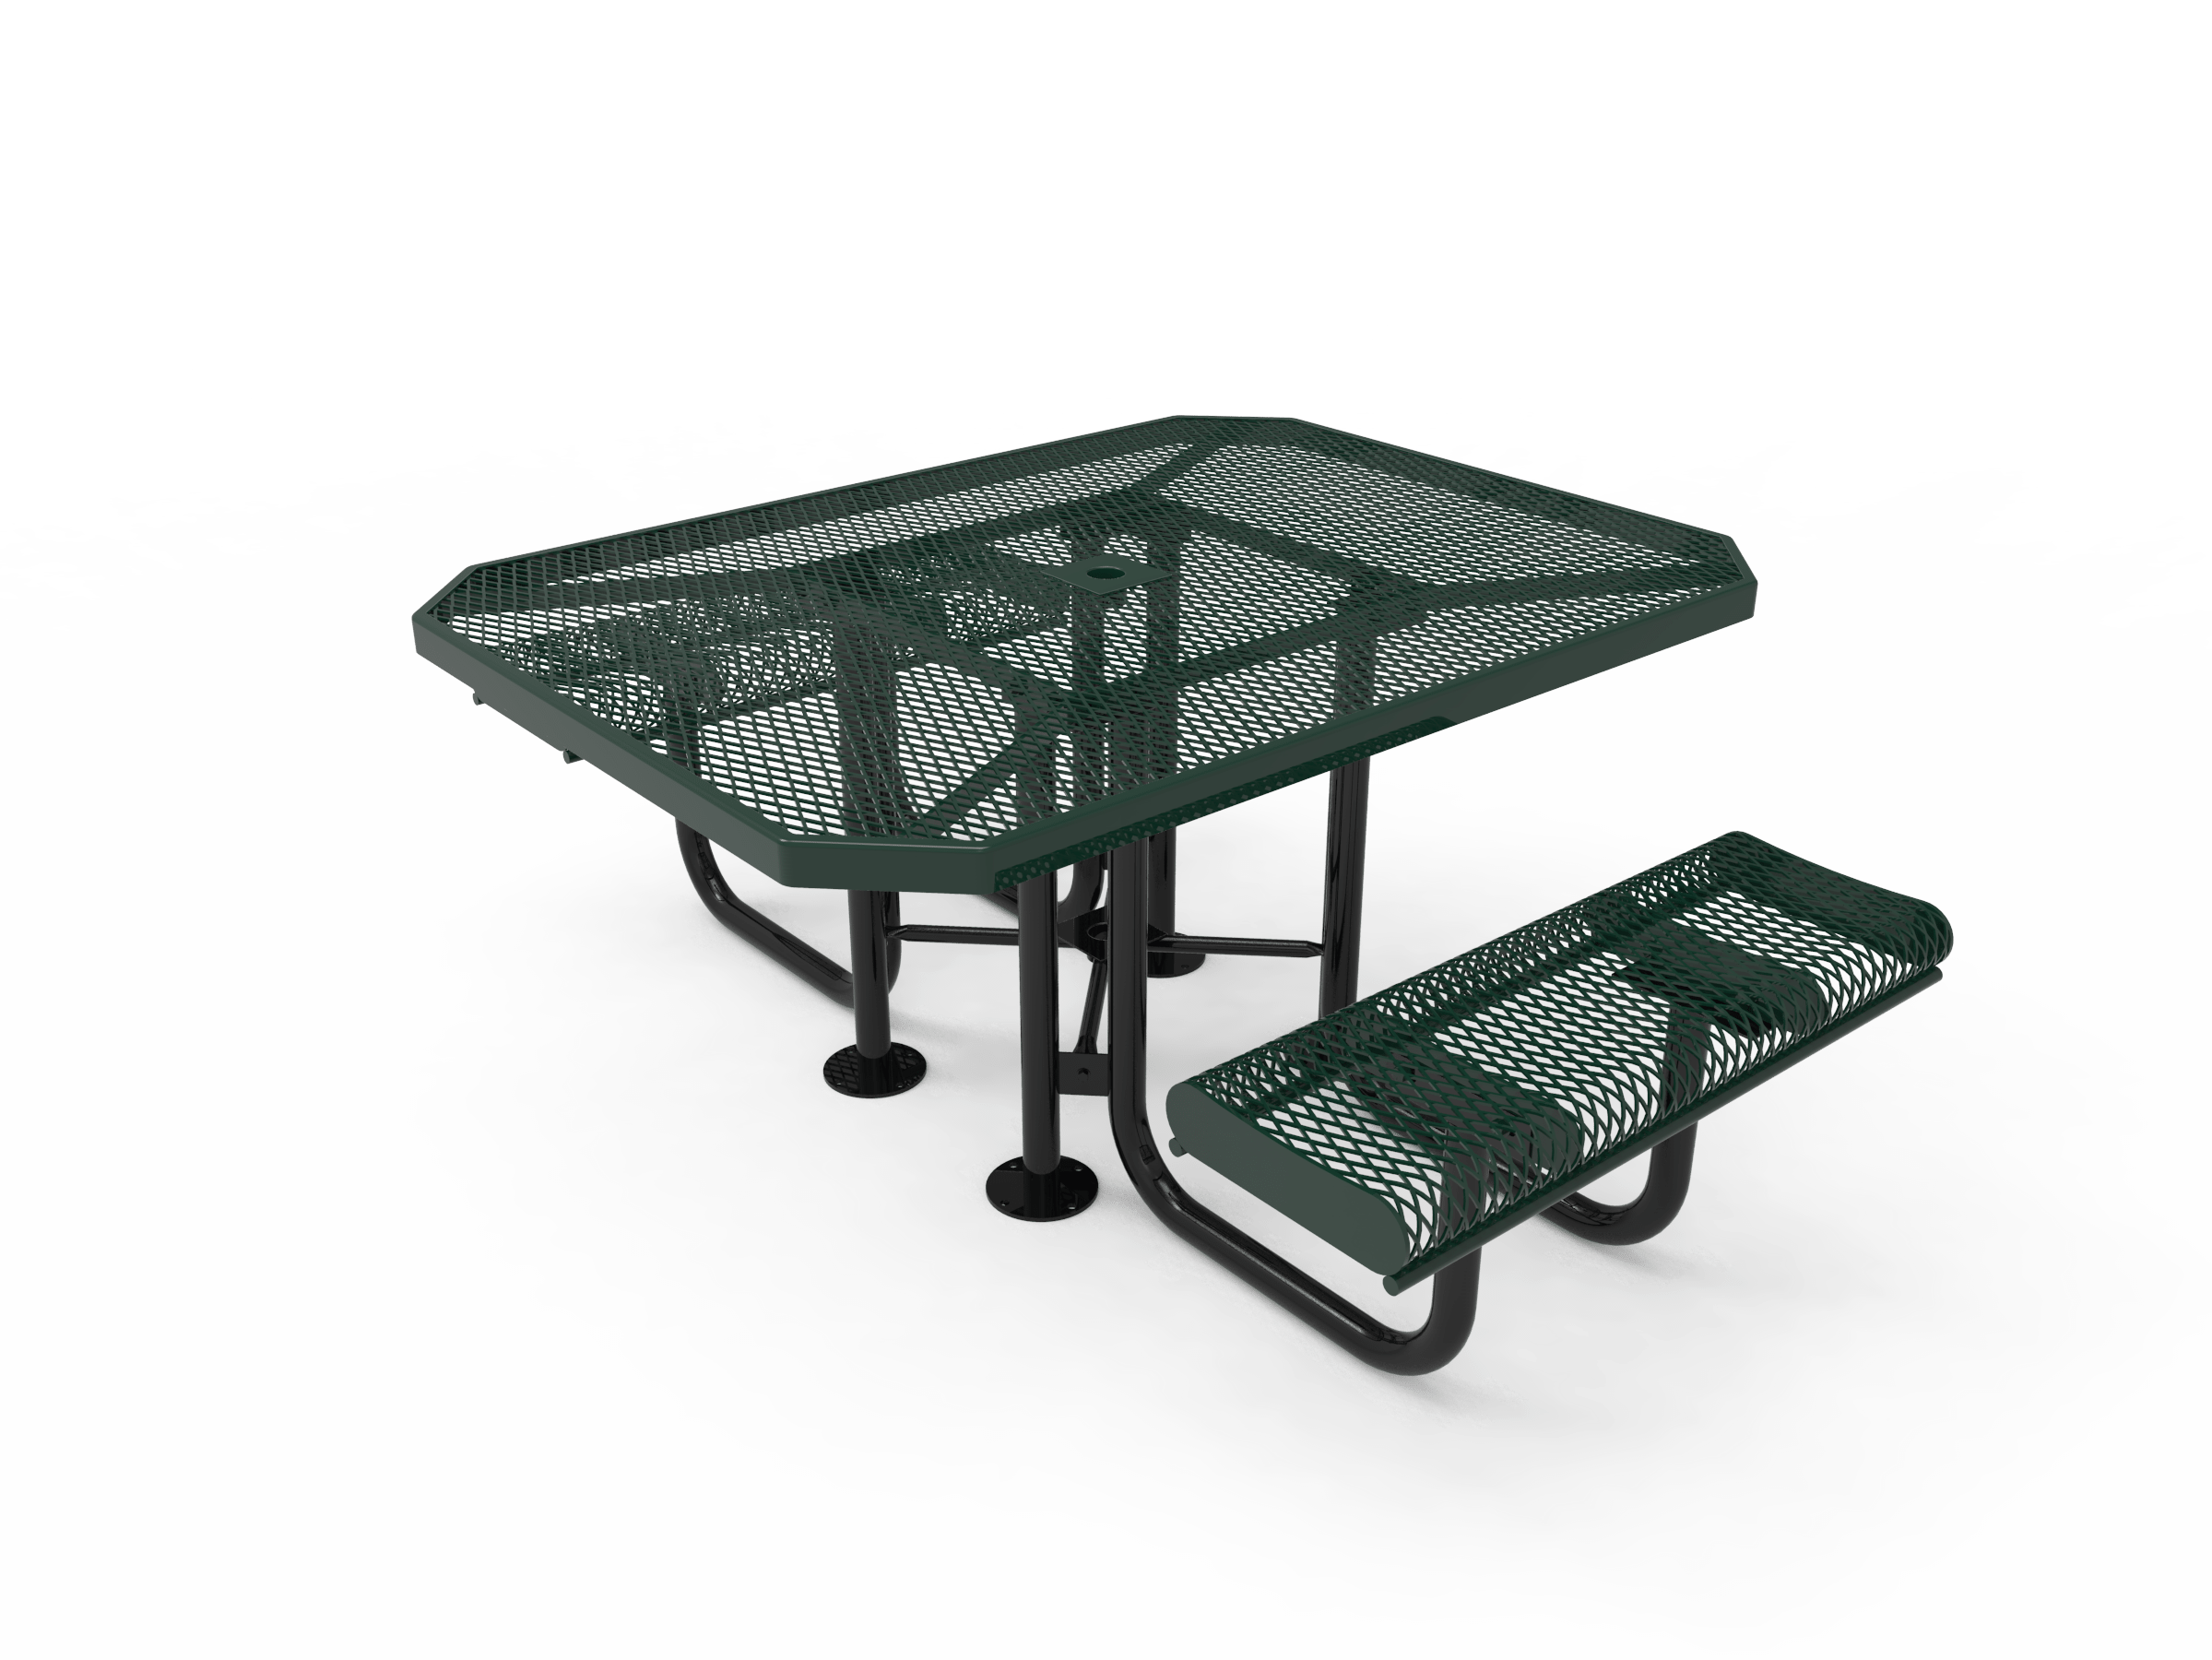 46″ Oct Picnic Table 2 Rolled Seats-Mesh
TOR46-C-04-012
Industry Standard Finish
$1339.00
TOR46-A-04-012
Advantage Premium Finish
$1619.00
